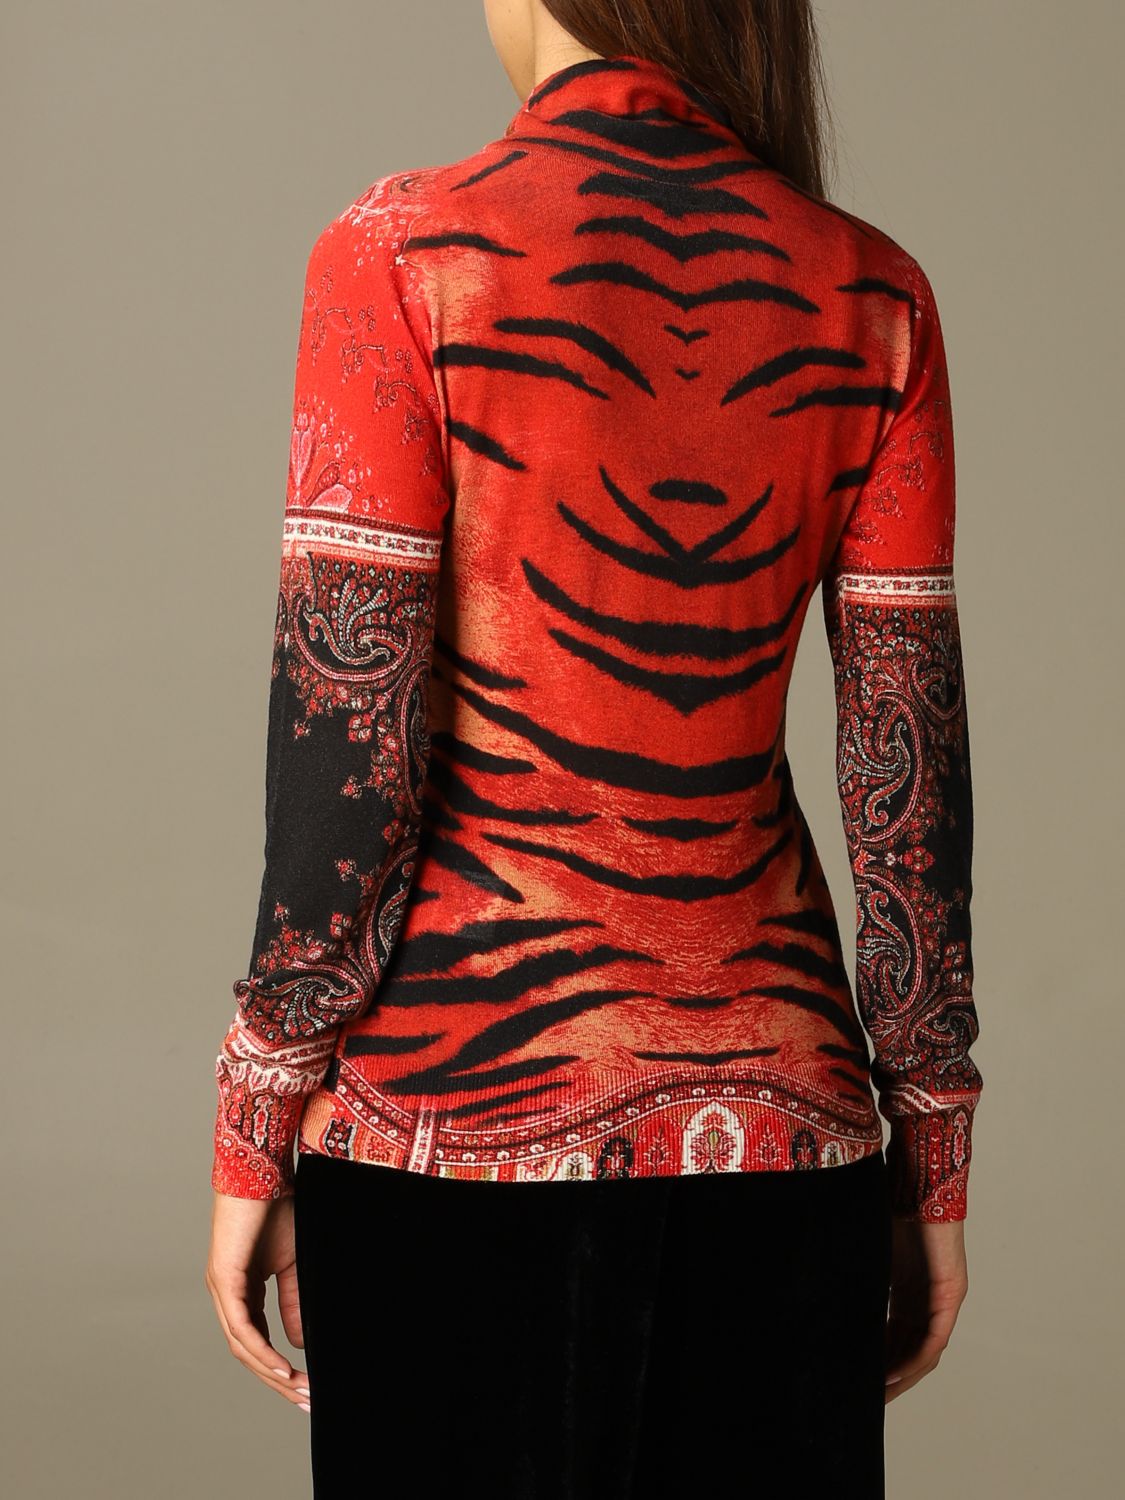 Etro turtleneck in silk and paisley cashmere